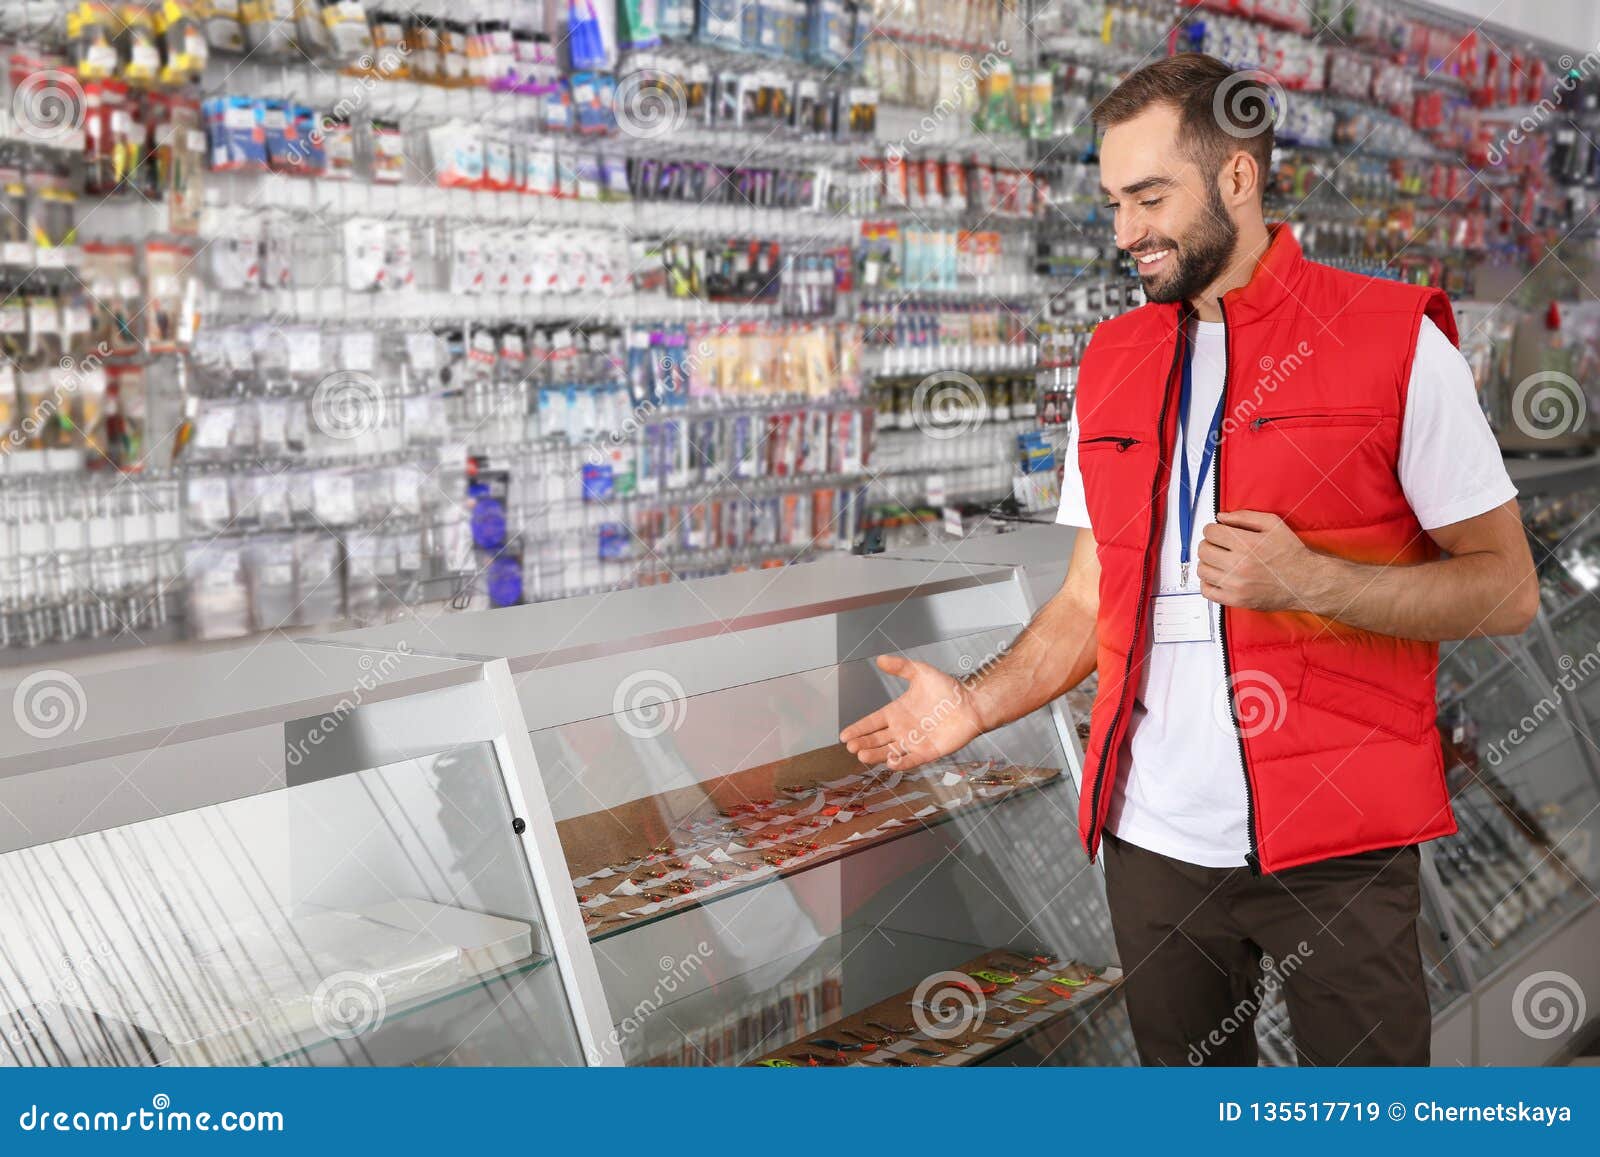 Salesman Standing Near Showcase With Fishing Equipment In Sports Shop. Stock Image - Image of ...